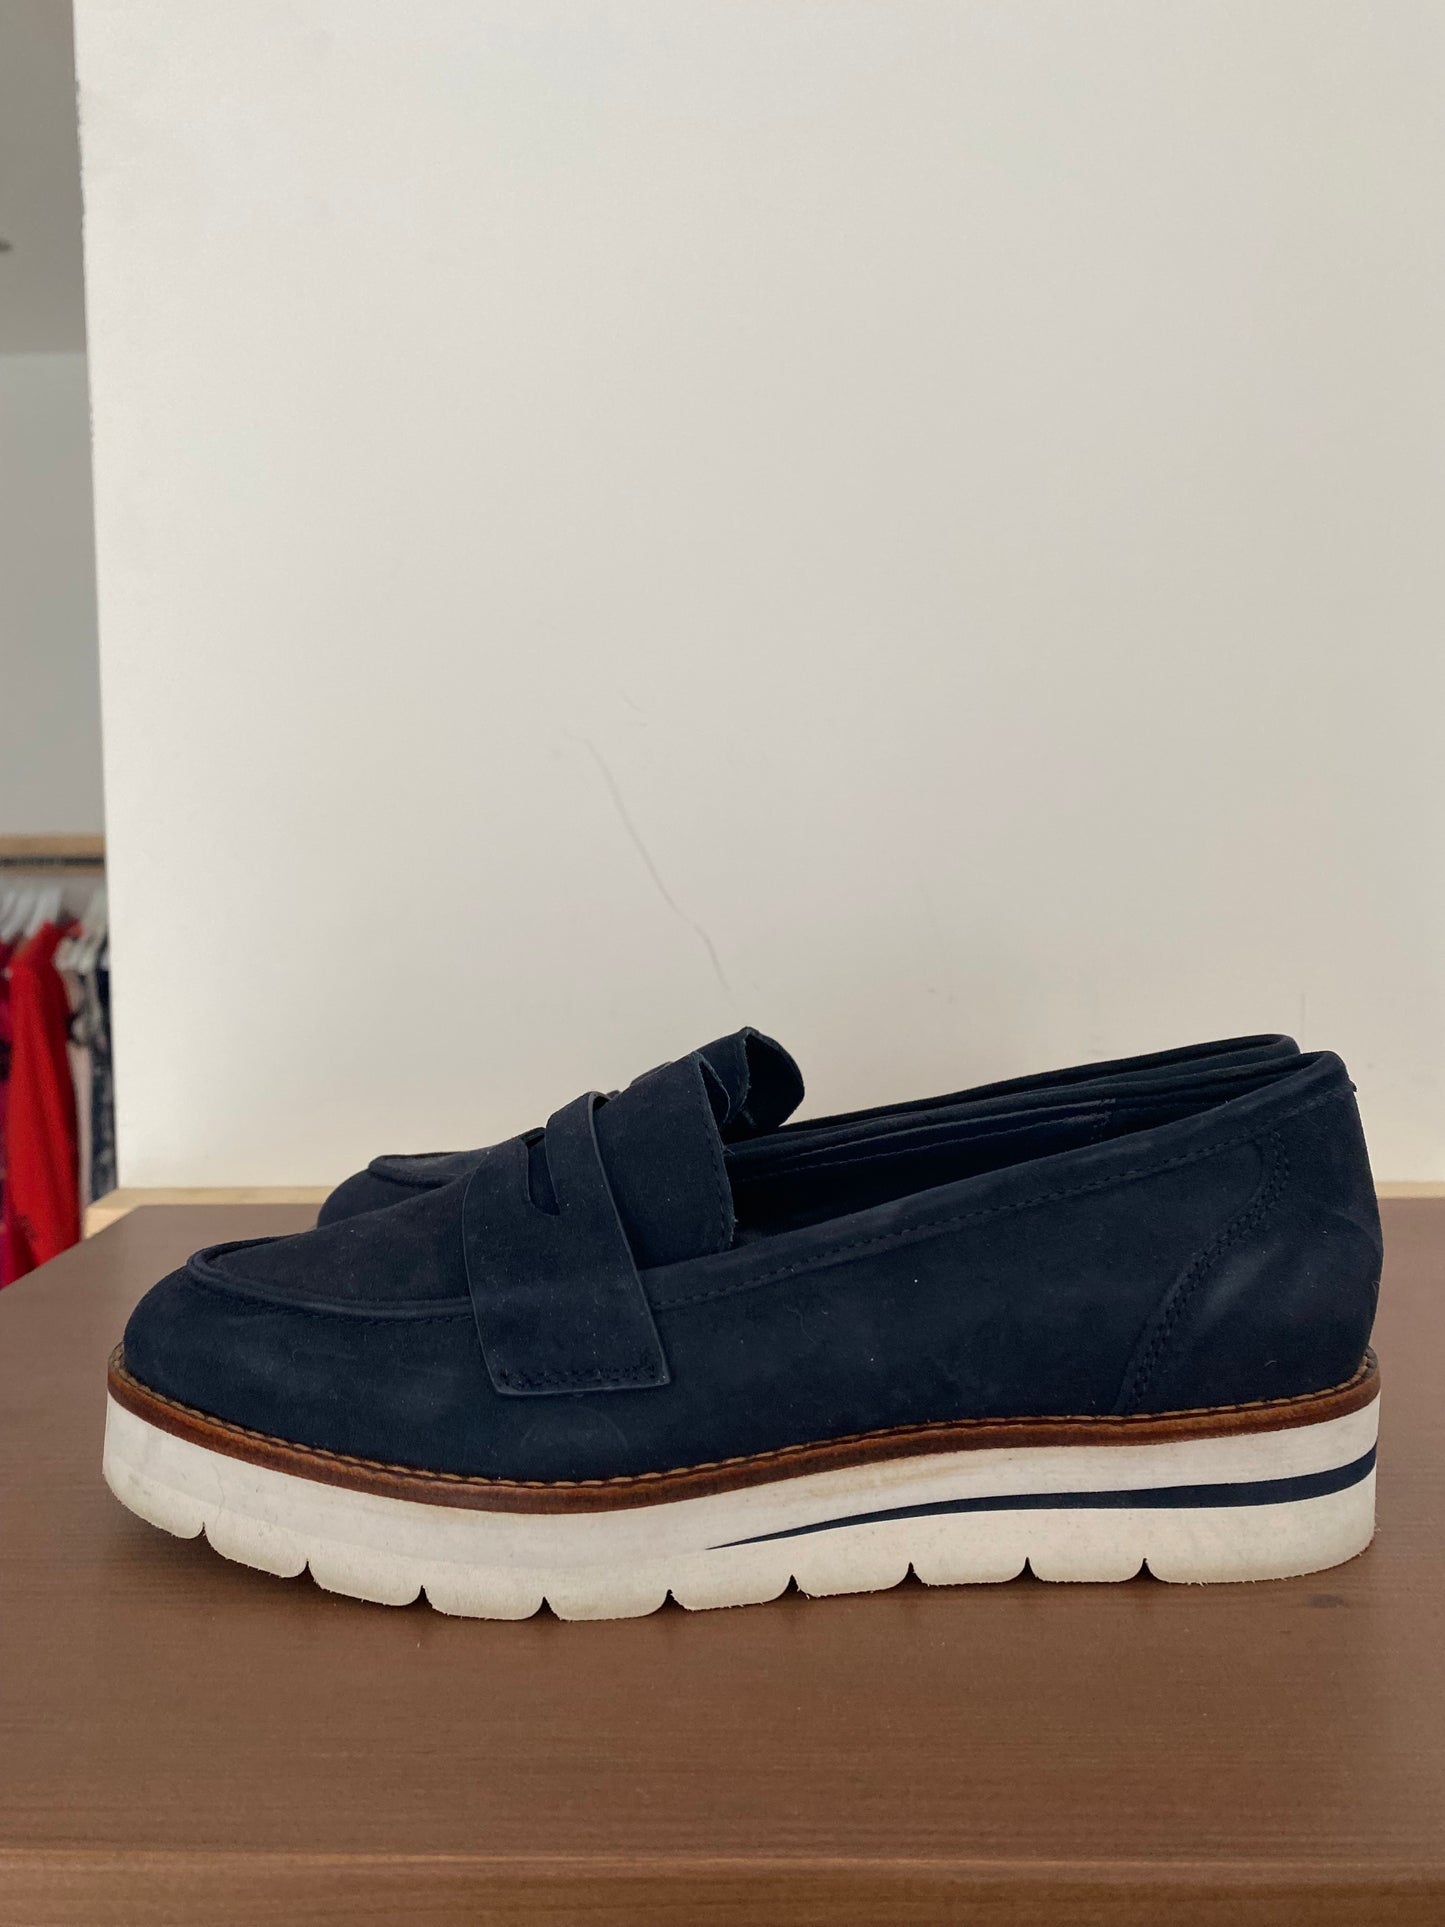 Dune Blue Suede Loafers Size 4